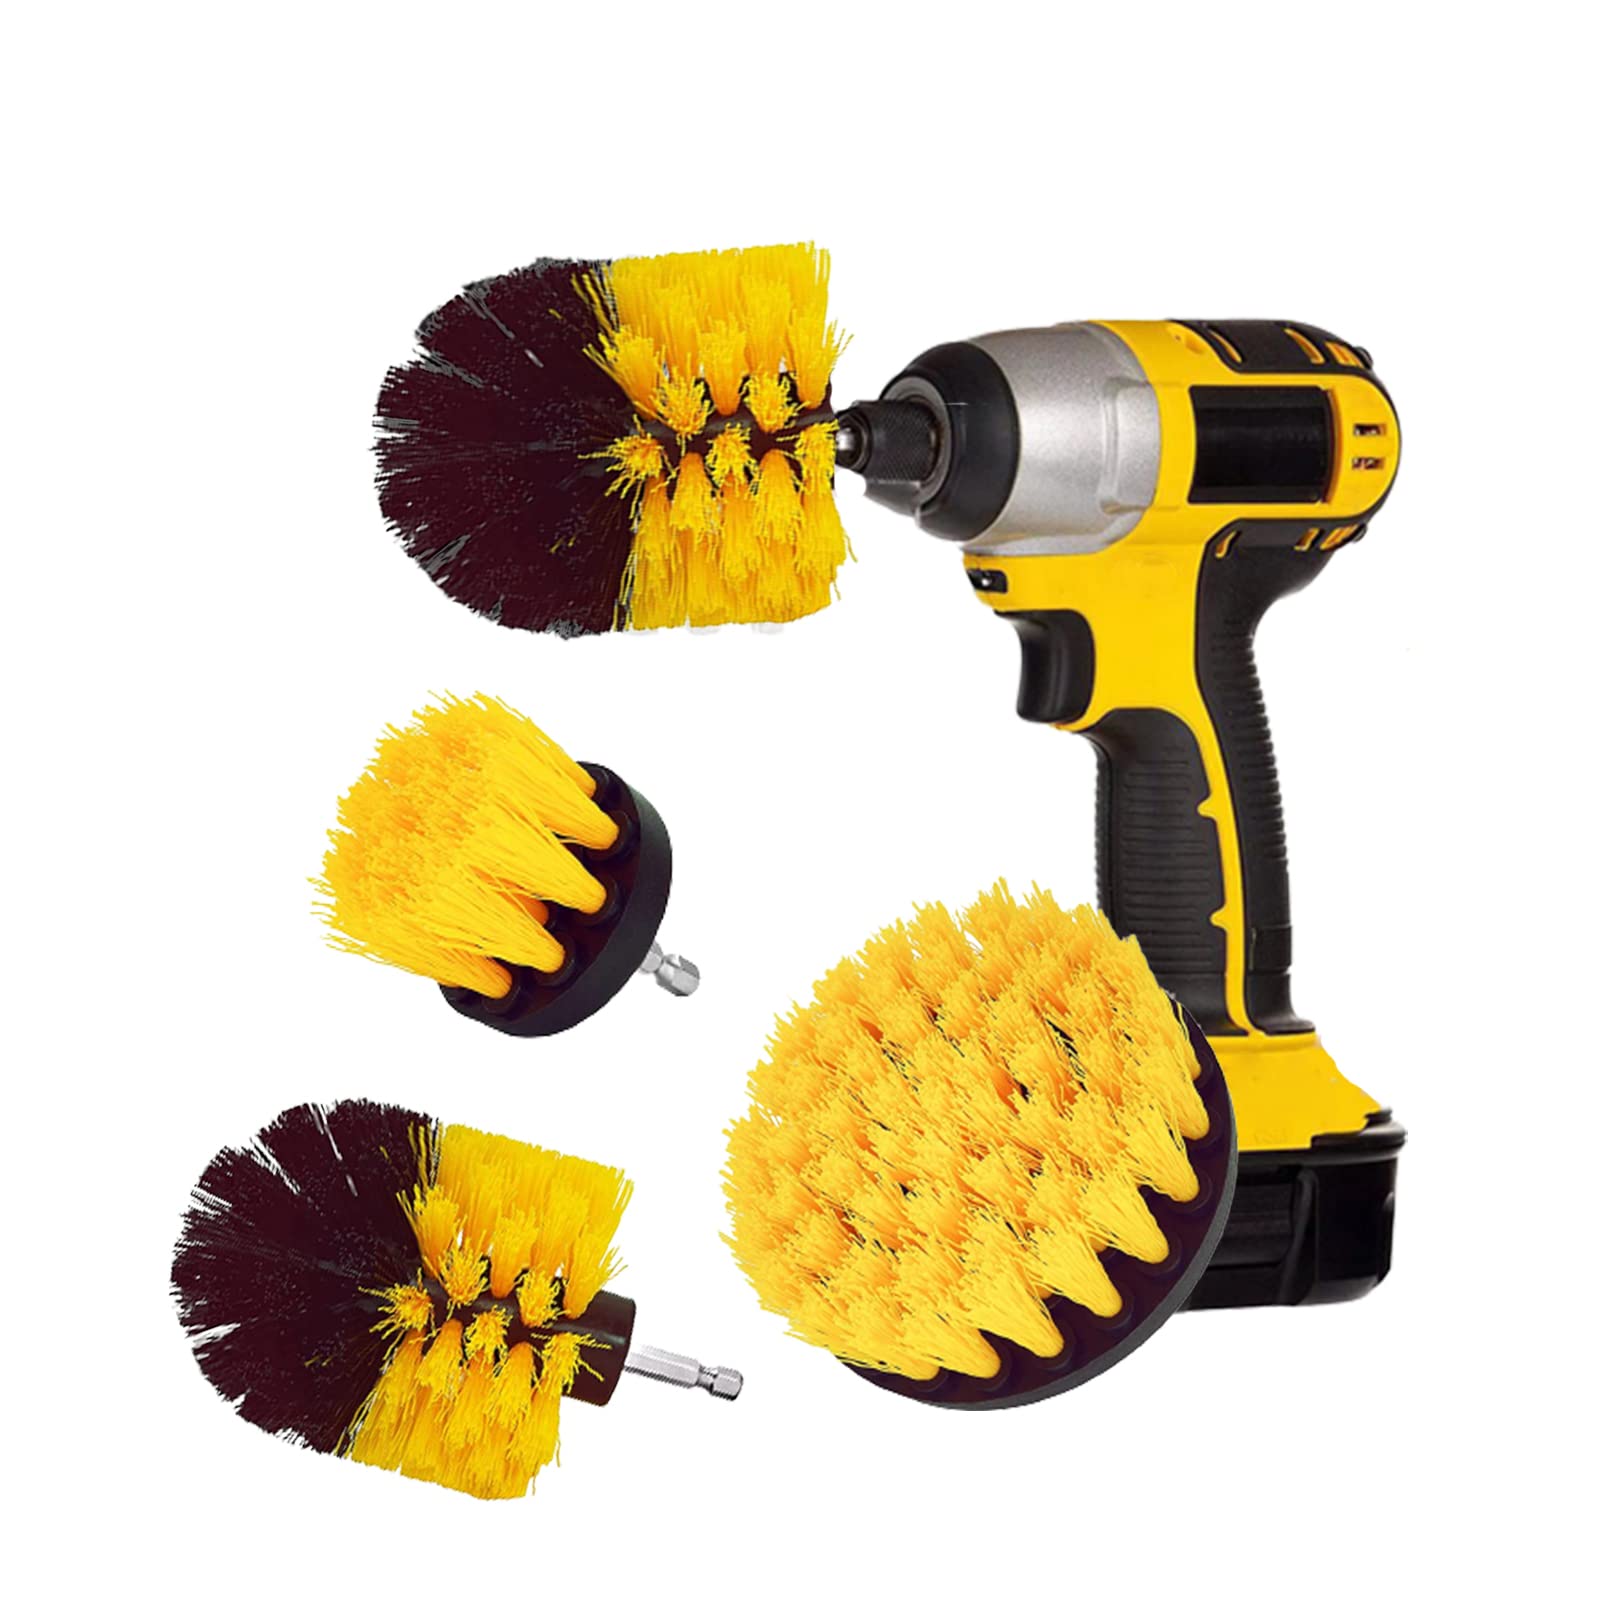 3-Pack Drill Brush Set - Power Scrubber for Efficient Home Cleaning